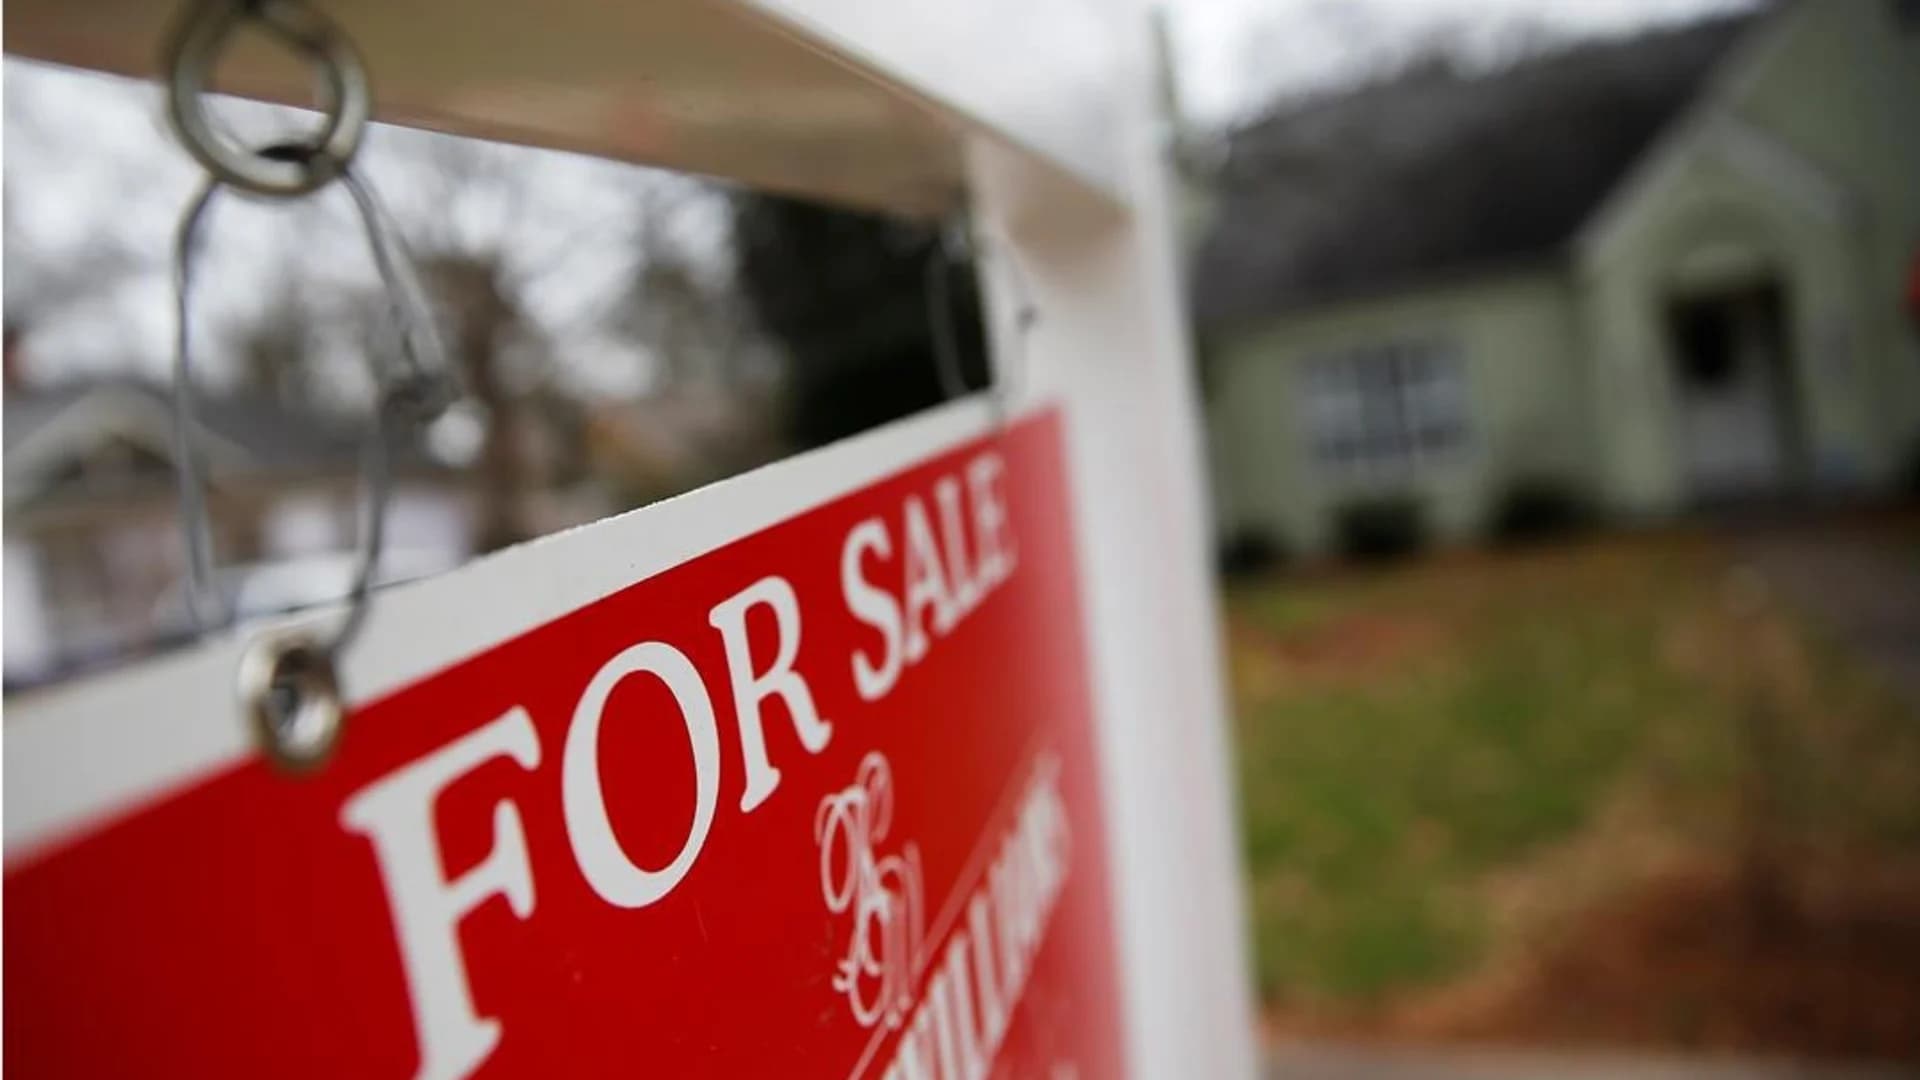 Young homebuyers scramble as prices rise faster than incomes